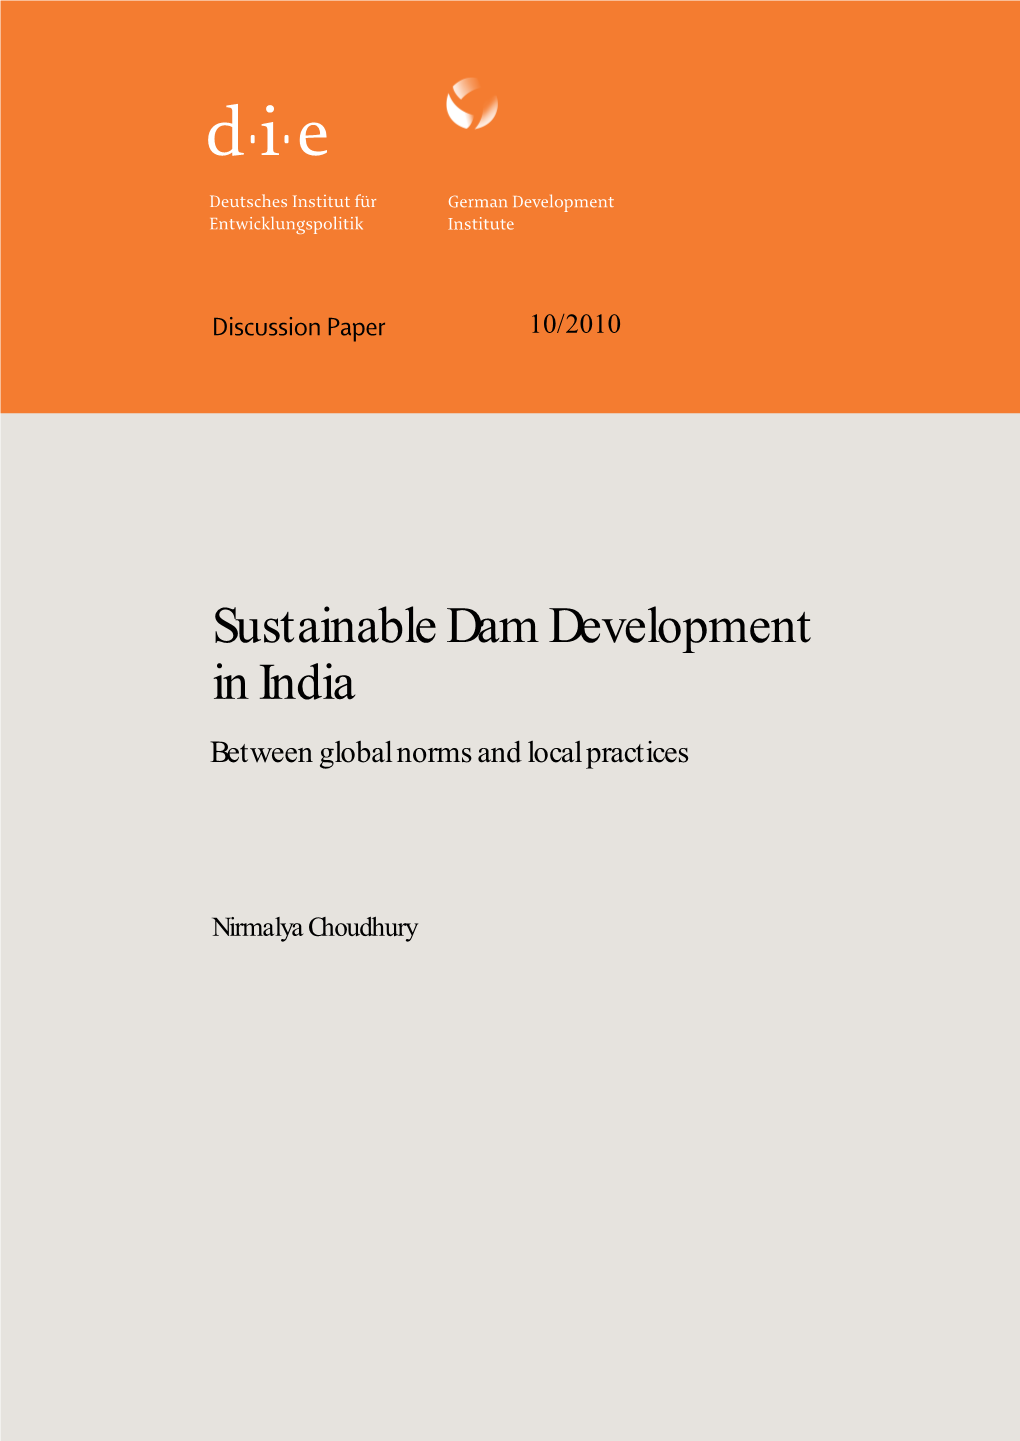 Sustainable Dam Development in India Between Global Norms and Local Practices